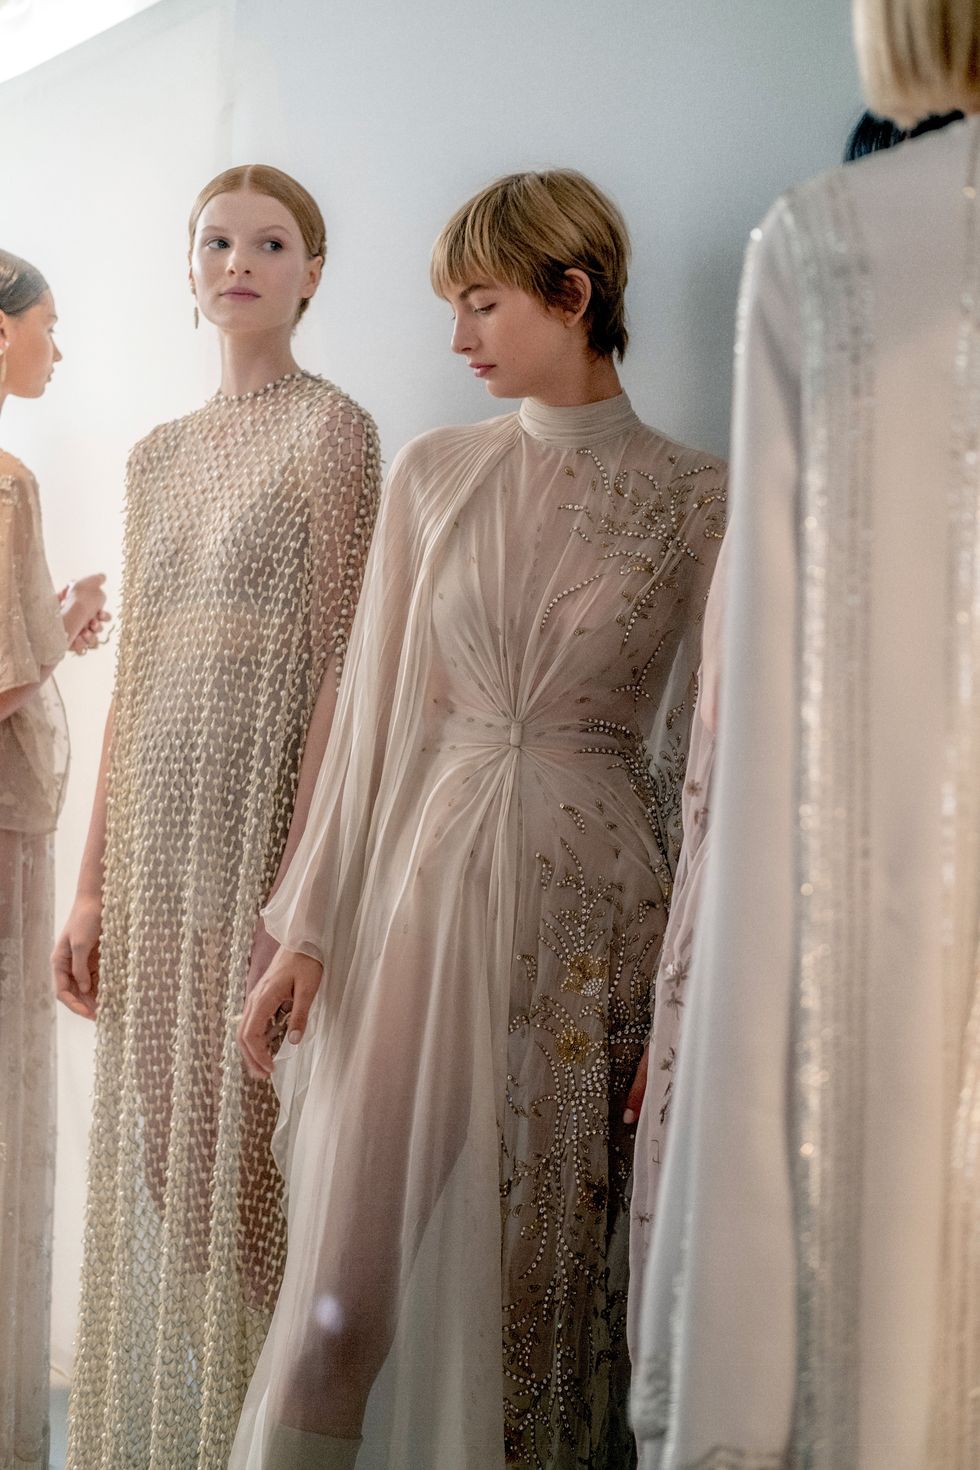 inside-the-making-of-dior’s-haute-couture-looks